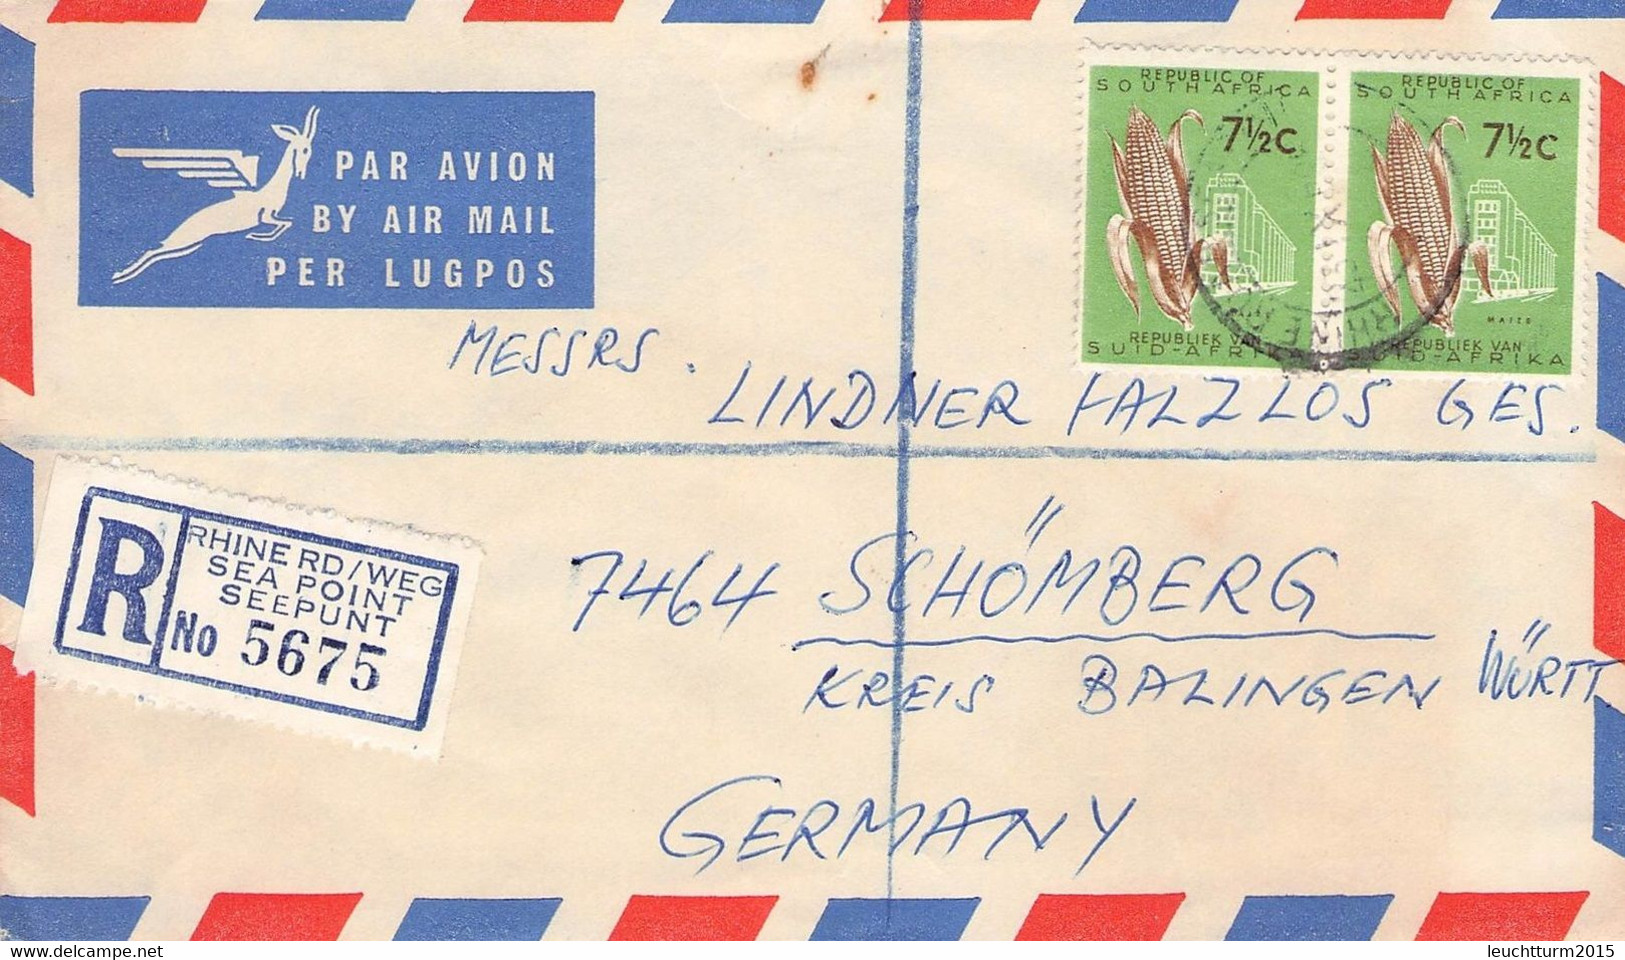 SOUTH AFRICA - AIR MAIL/RECO 1965 SEA POINT - SCHÖMBERG/GERMANY 1965I /ak1017 - Covers & Documents